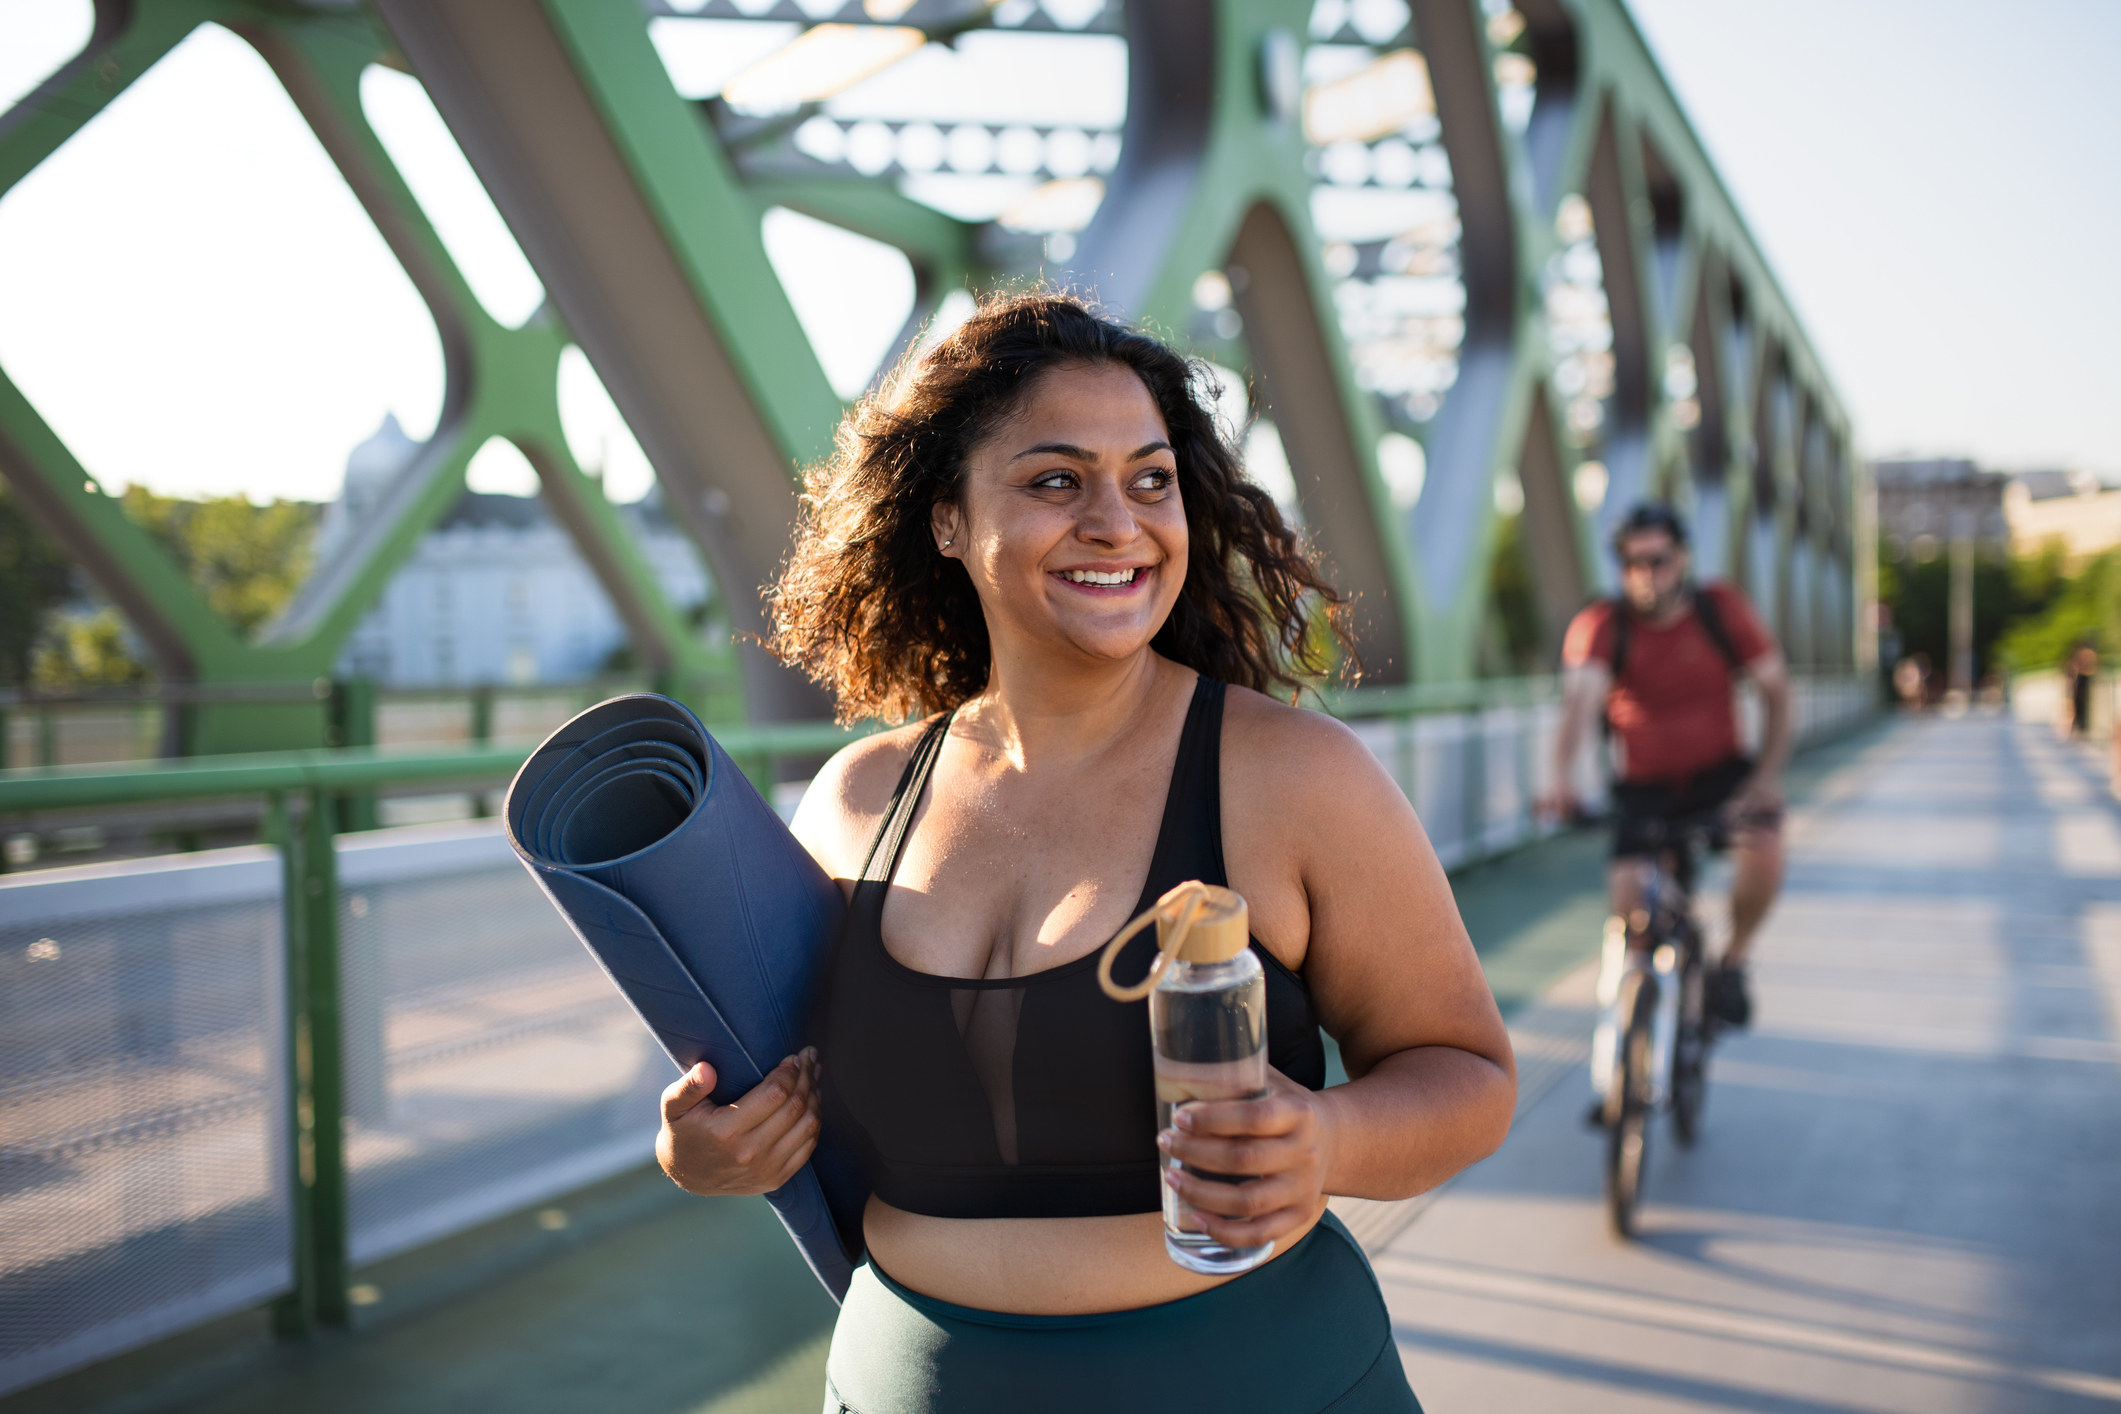 A woman walks home from a workout class with a yoga mat and a water bottle